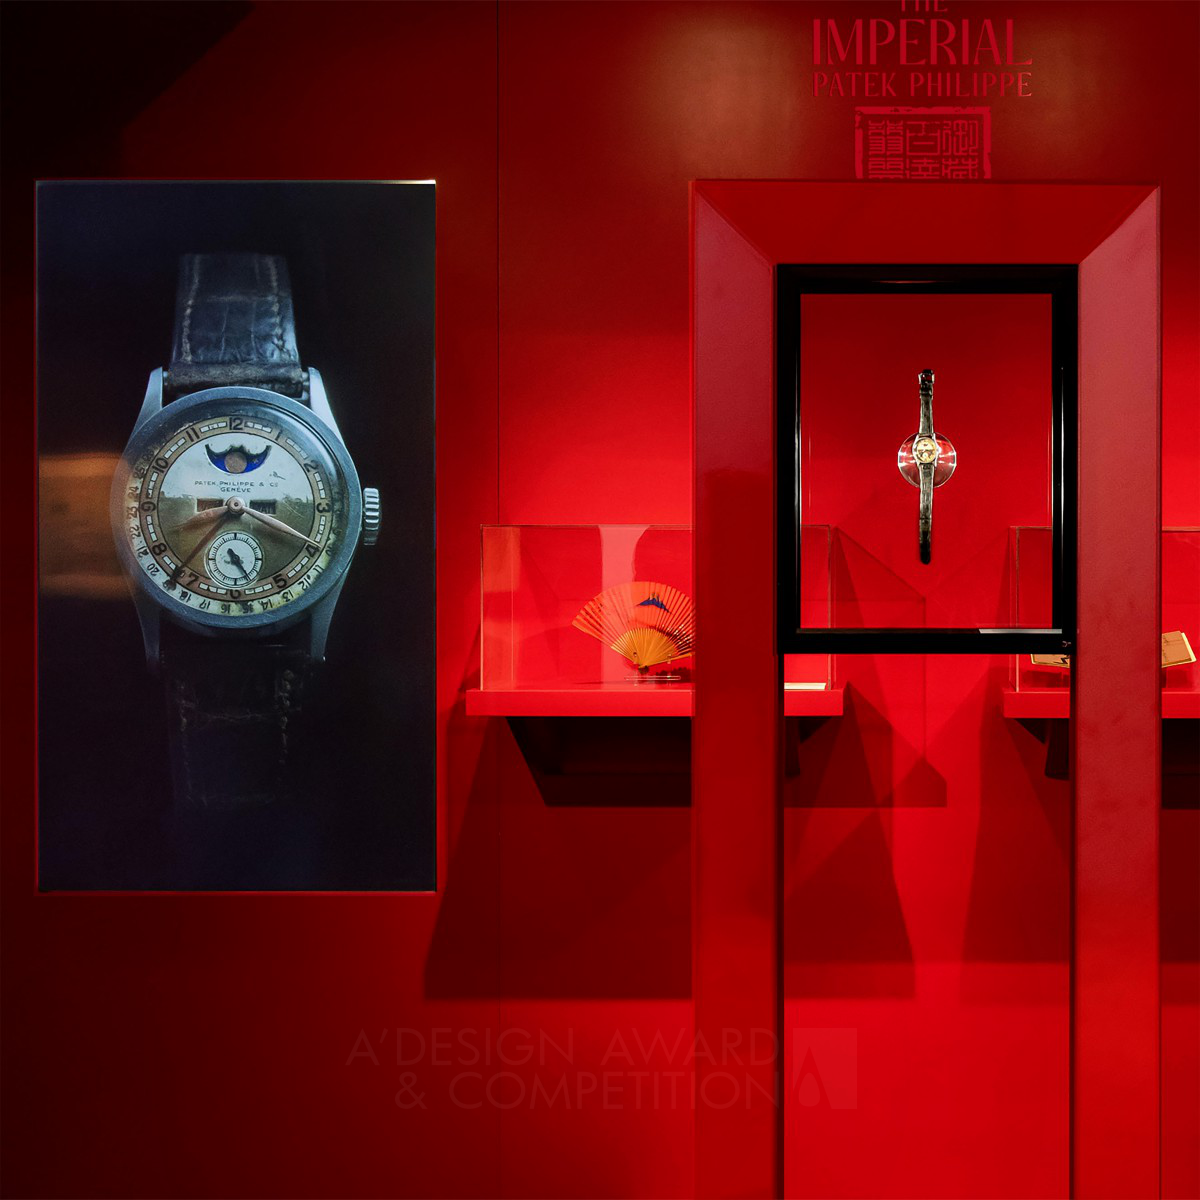 The Imperial Patek Philippe Marketing Campaign by Phillips